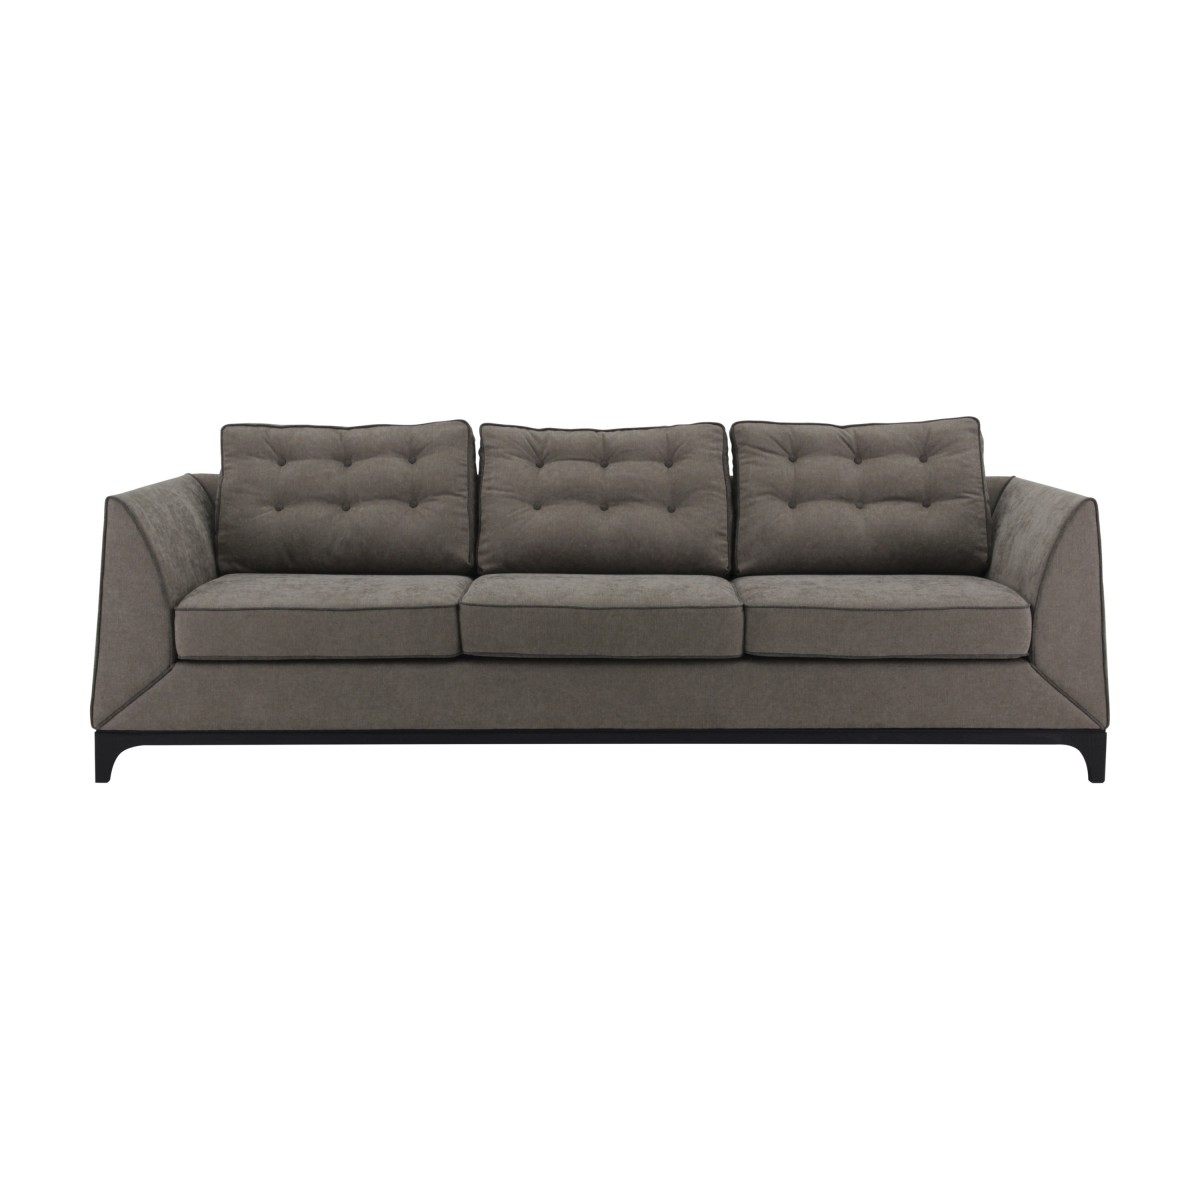 contemporary style 5 seater sofa